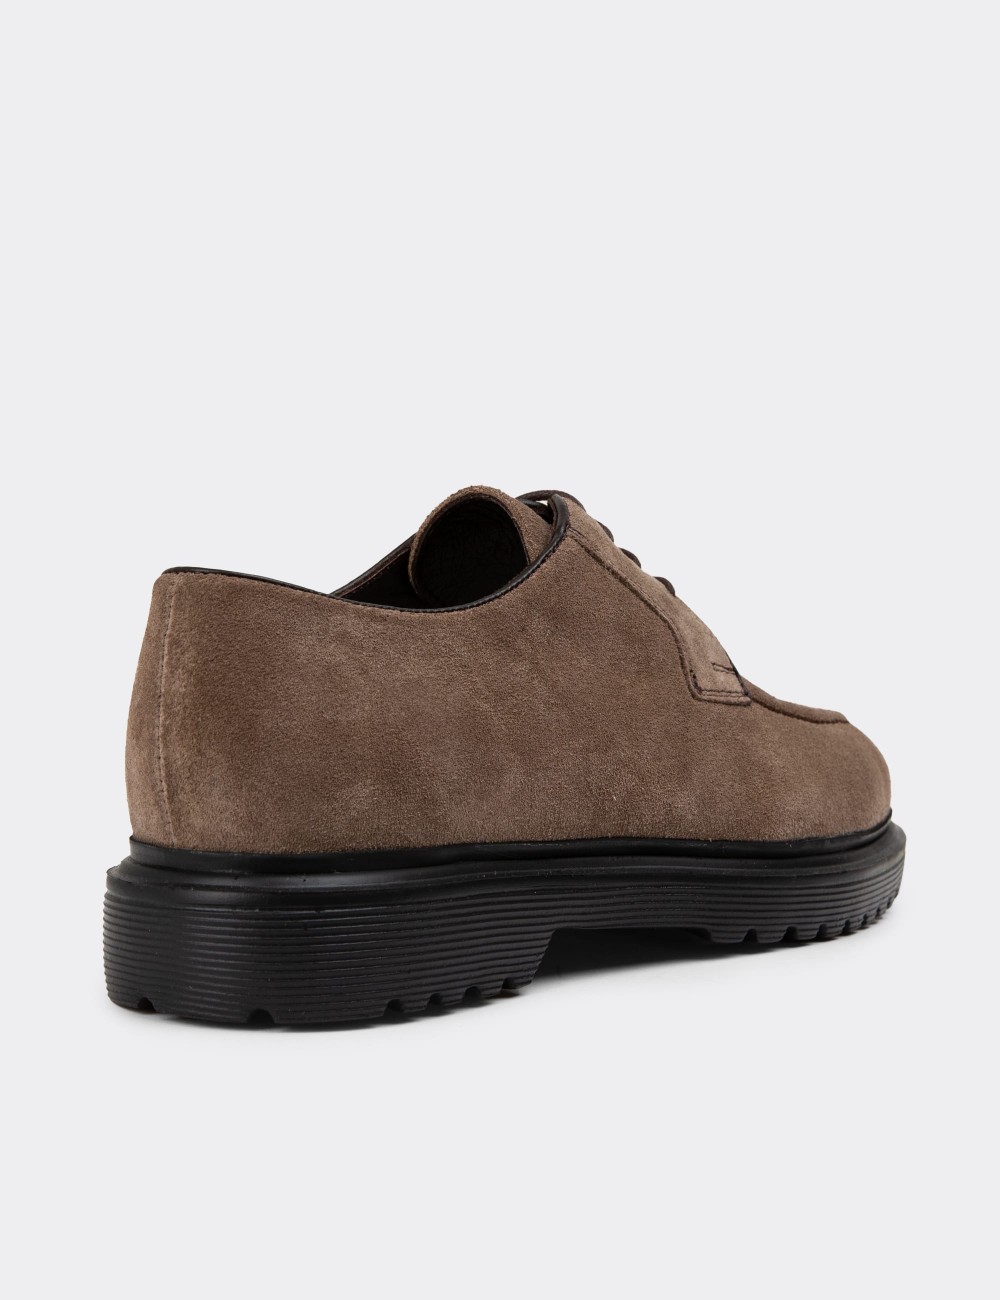 Sandstone Suede Leather Lace-up Shoes - 01931MVZNE01